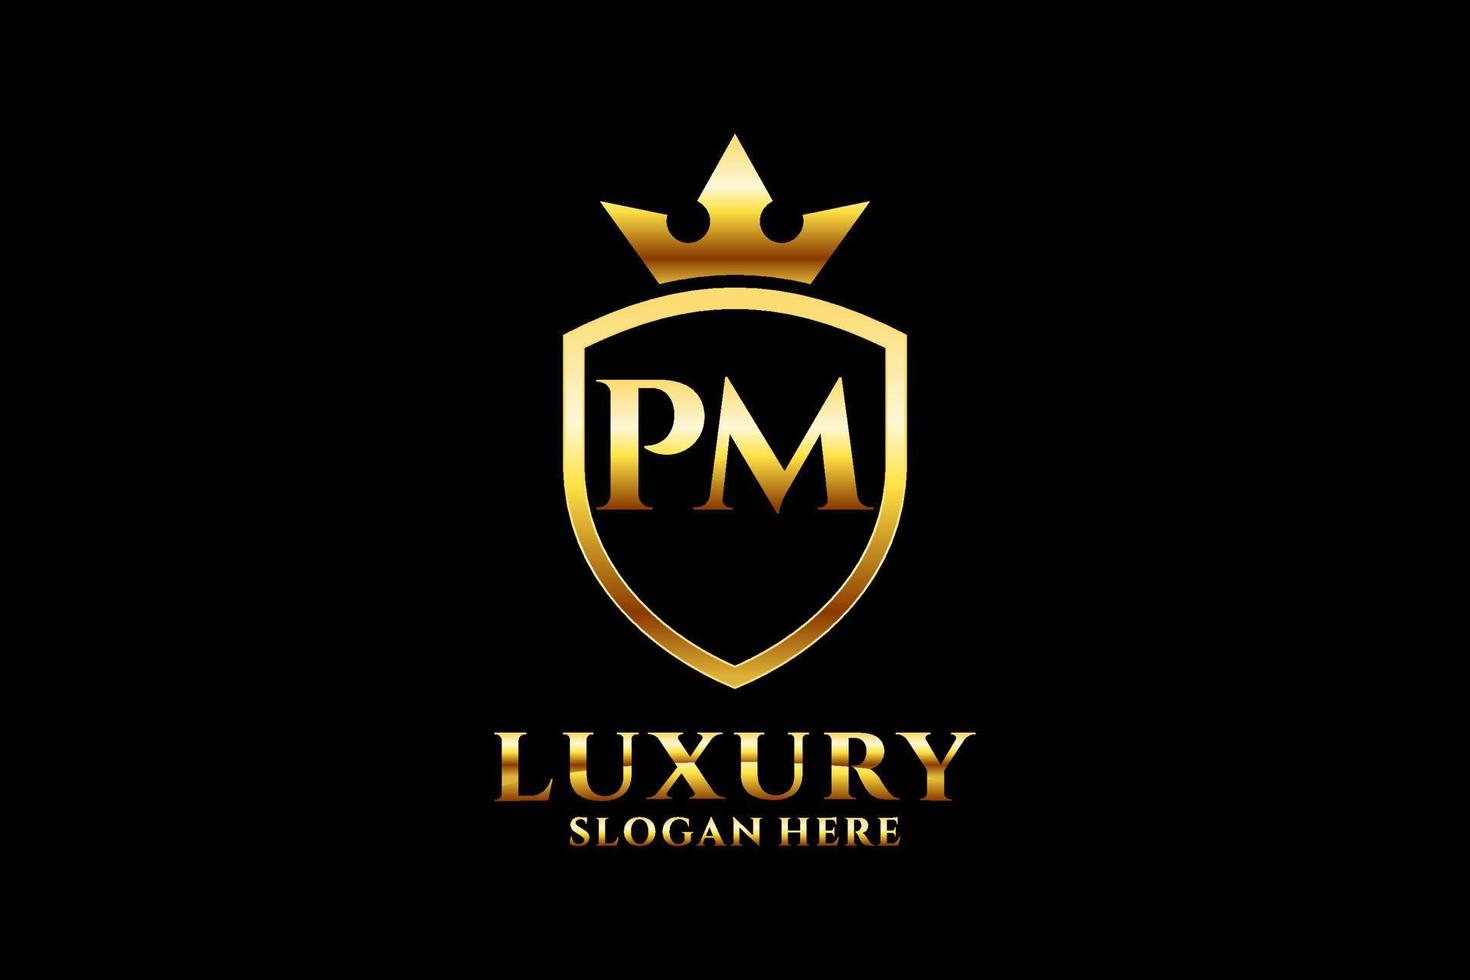 initial PM elegant luxury monogram logo or badge template with scrolls and royal crown - perfect for luxurious branding projects vector